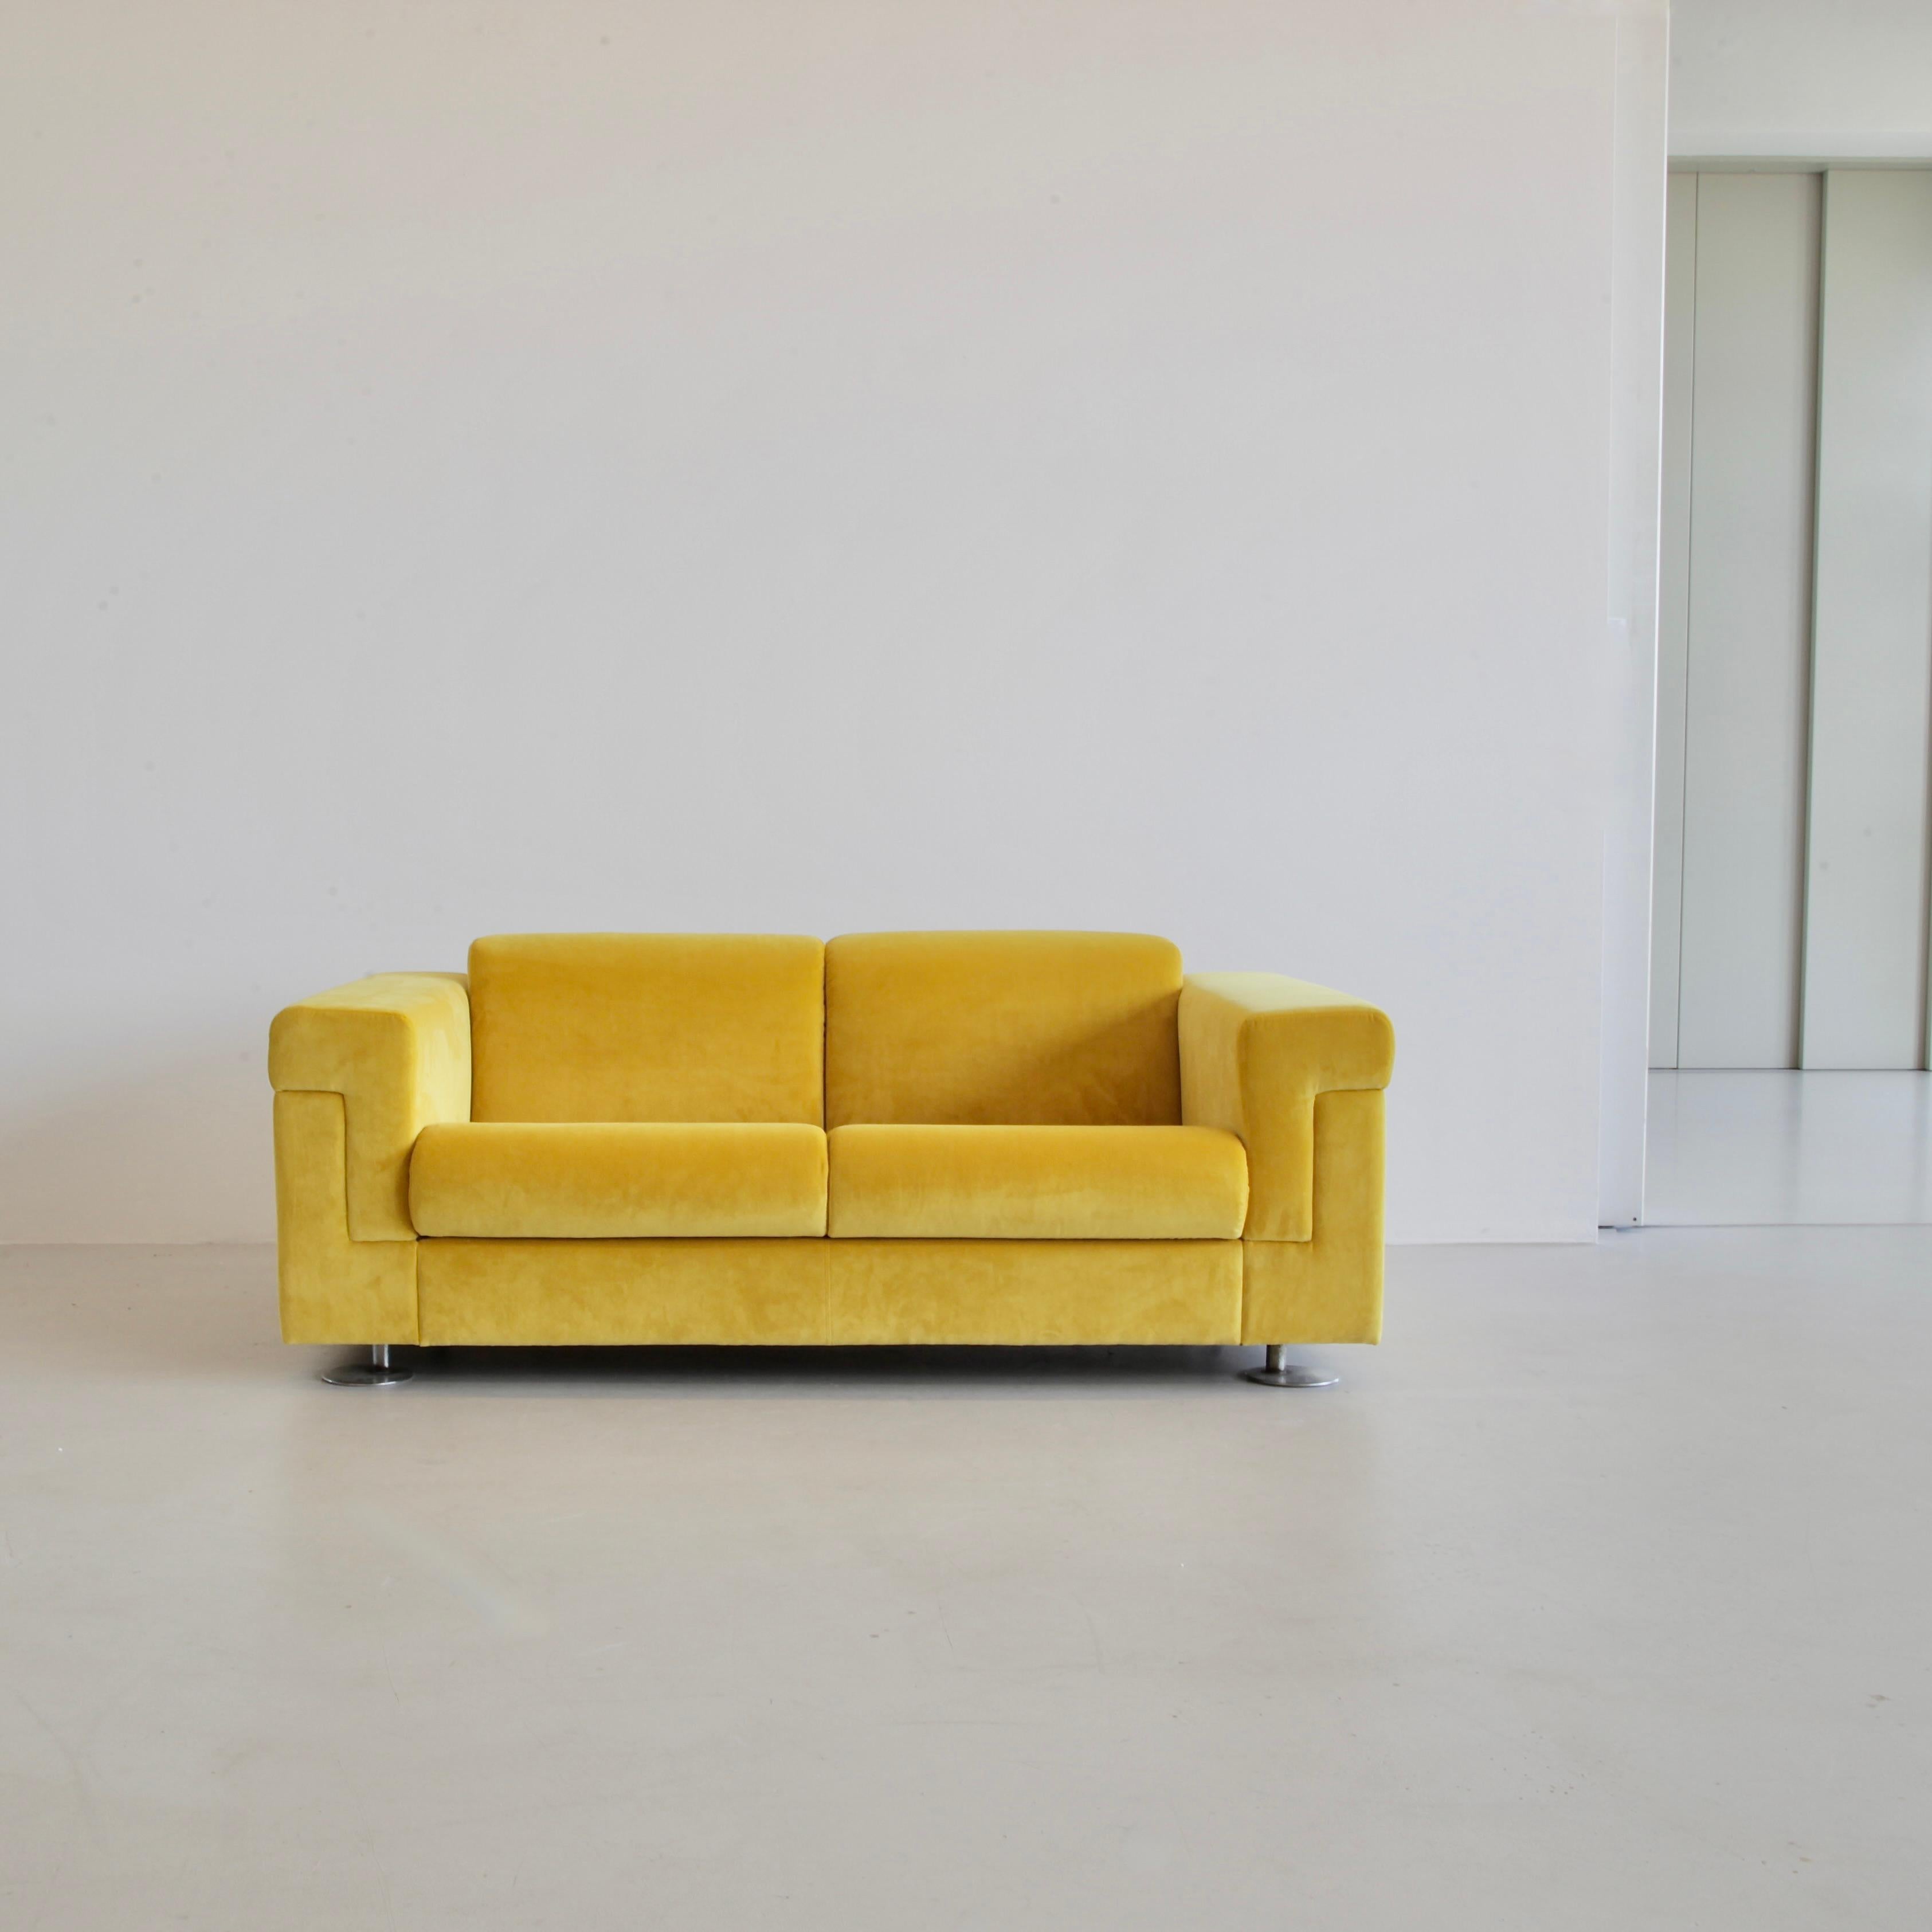 Two-seat sofa designed by Valeria Borsani and Alfredo Bonetti. Italy, Tecno, 1966.

Large sofa upholstered in yellow velvet designed by Tecno's Borsani and Bonetti in 1966. Polished metal feet appear retracted inwards with respect to the centre of